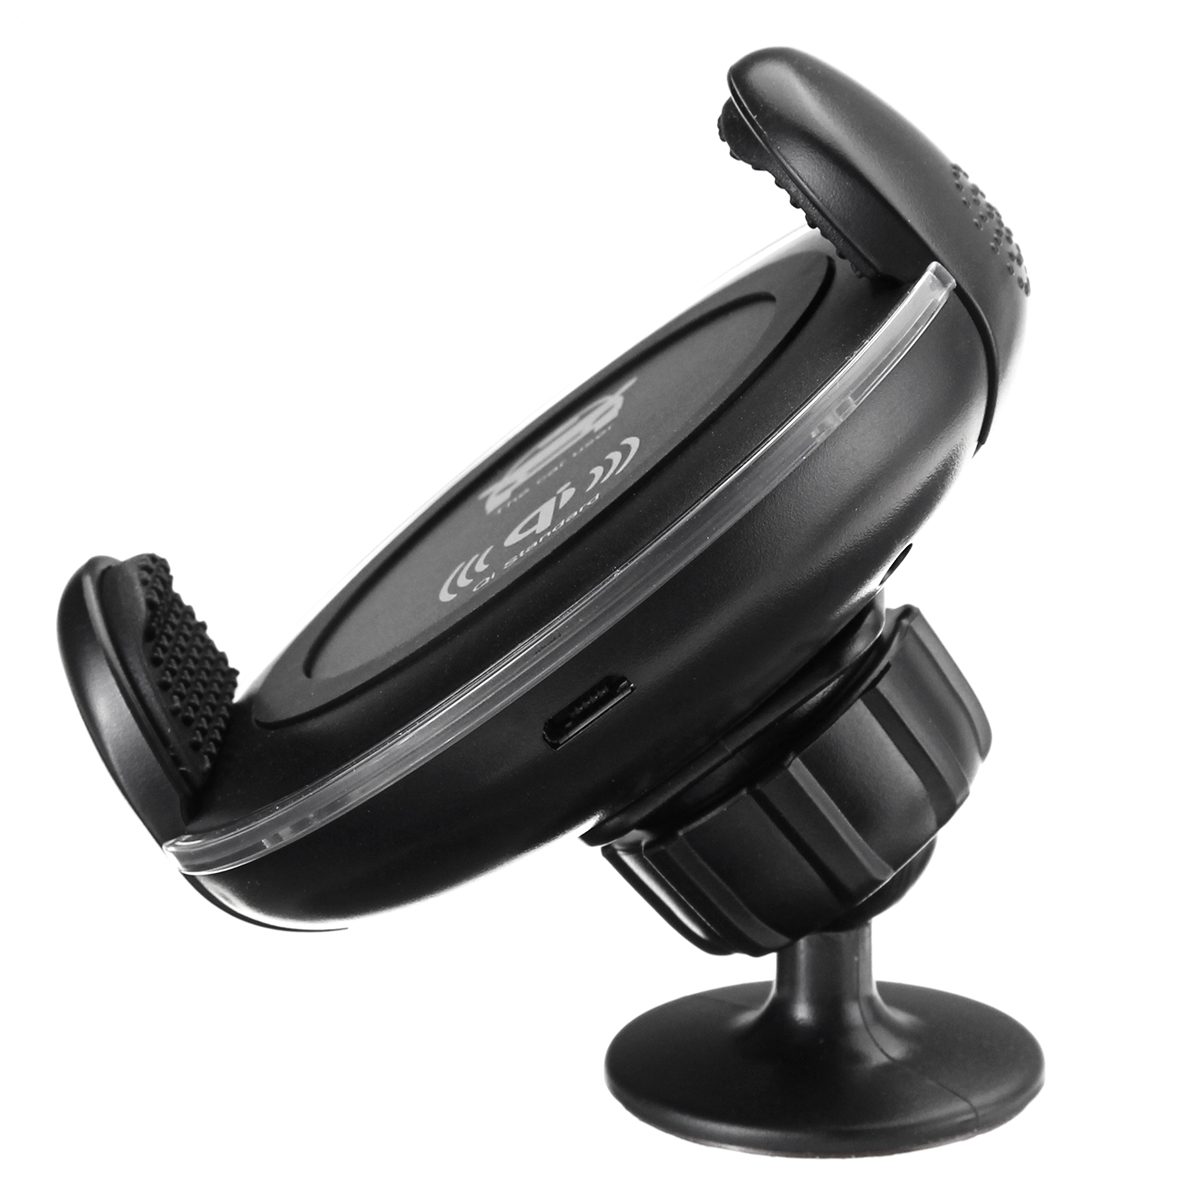 360-Degree-Wireless-Car-Mount-Charger-Dock-Air-Vent-Mount-Holder-for-iPhone-8-Plus-X-1206374-9